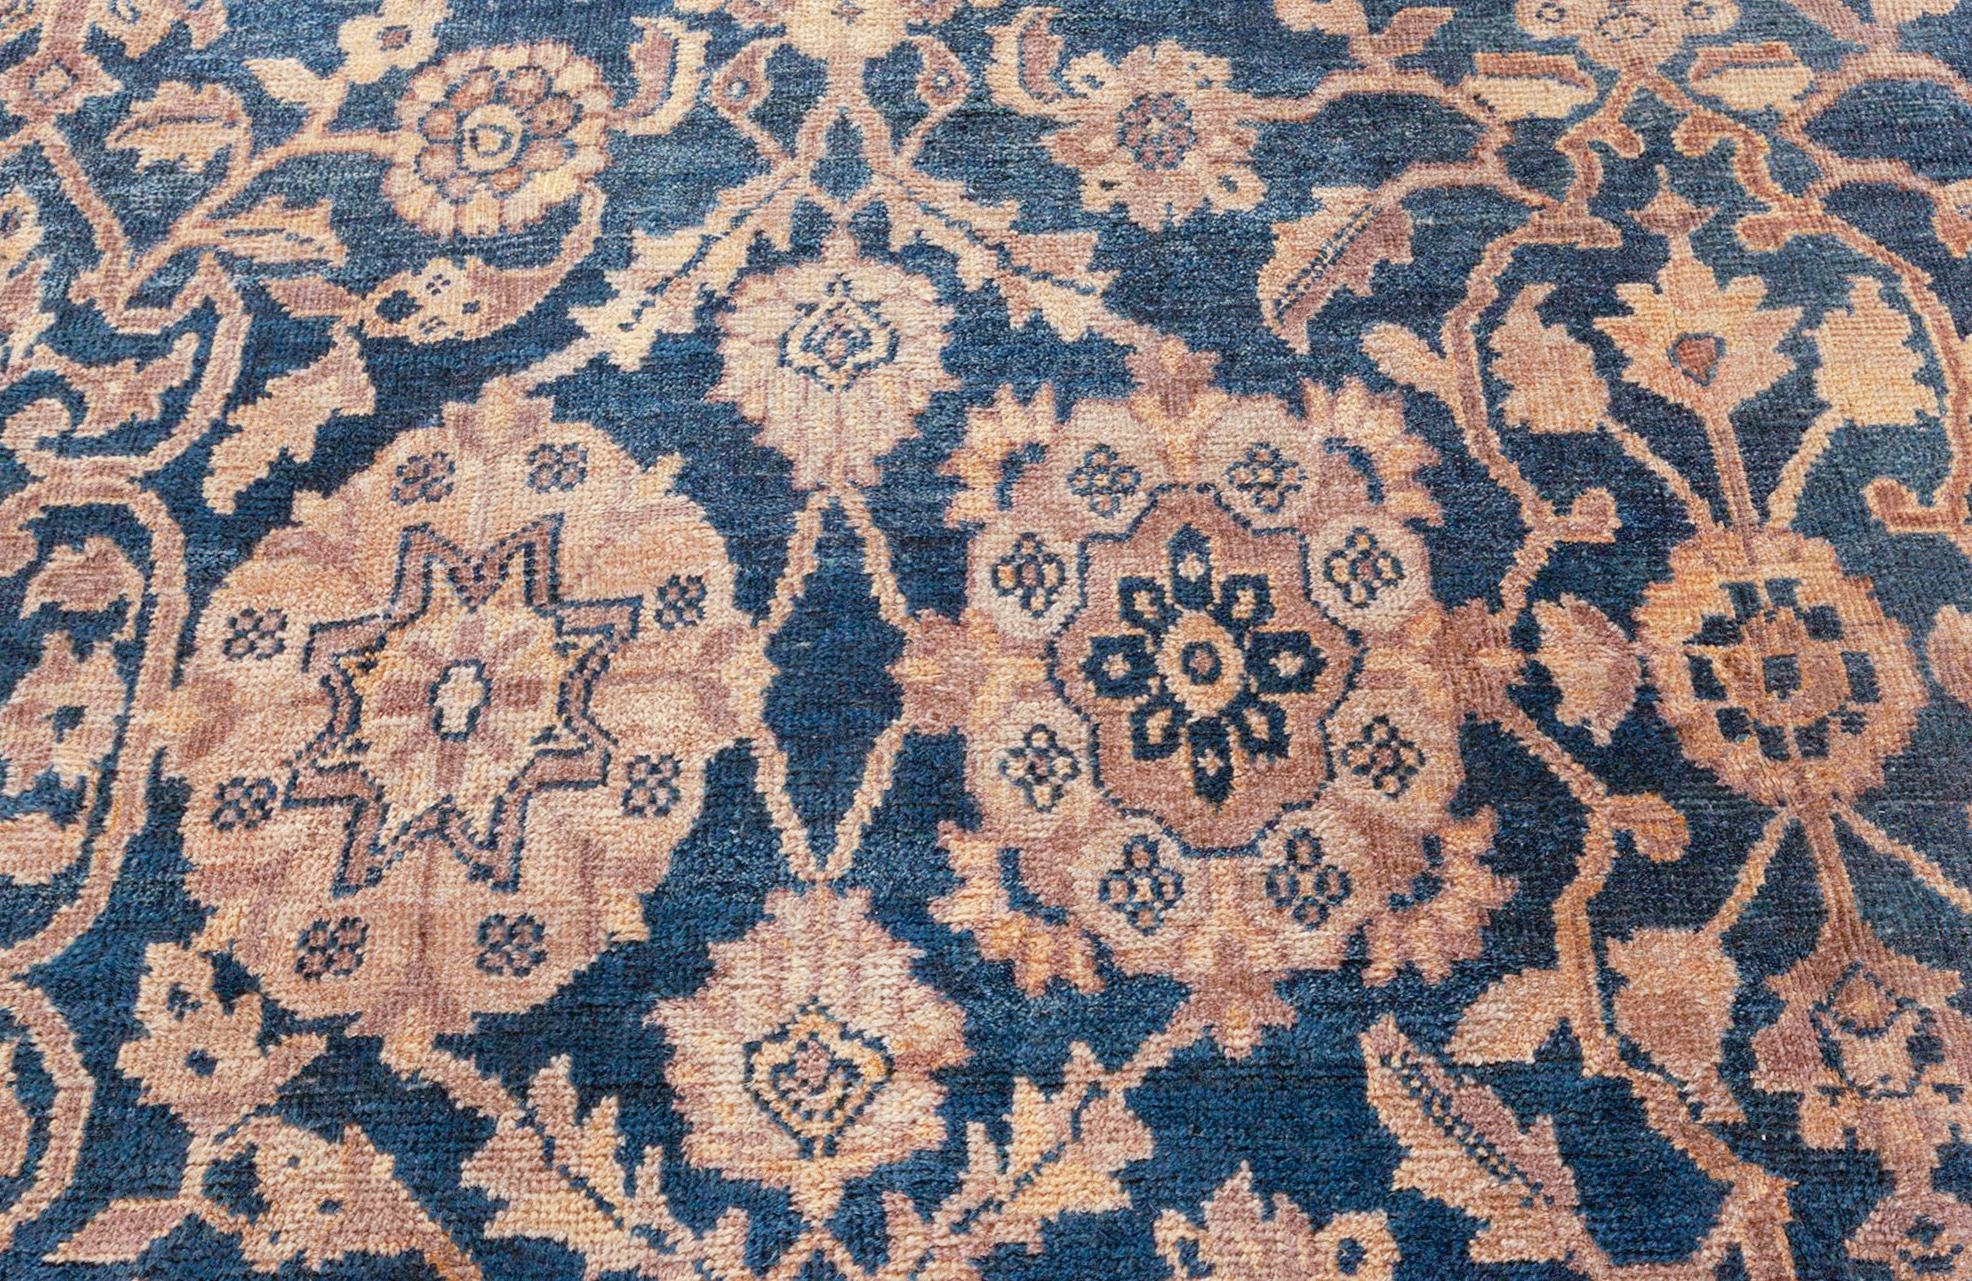 Early 20th Century Persian Sultanabad rug
Size: 11'8